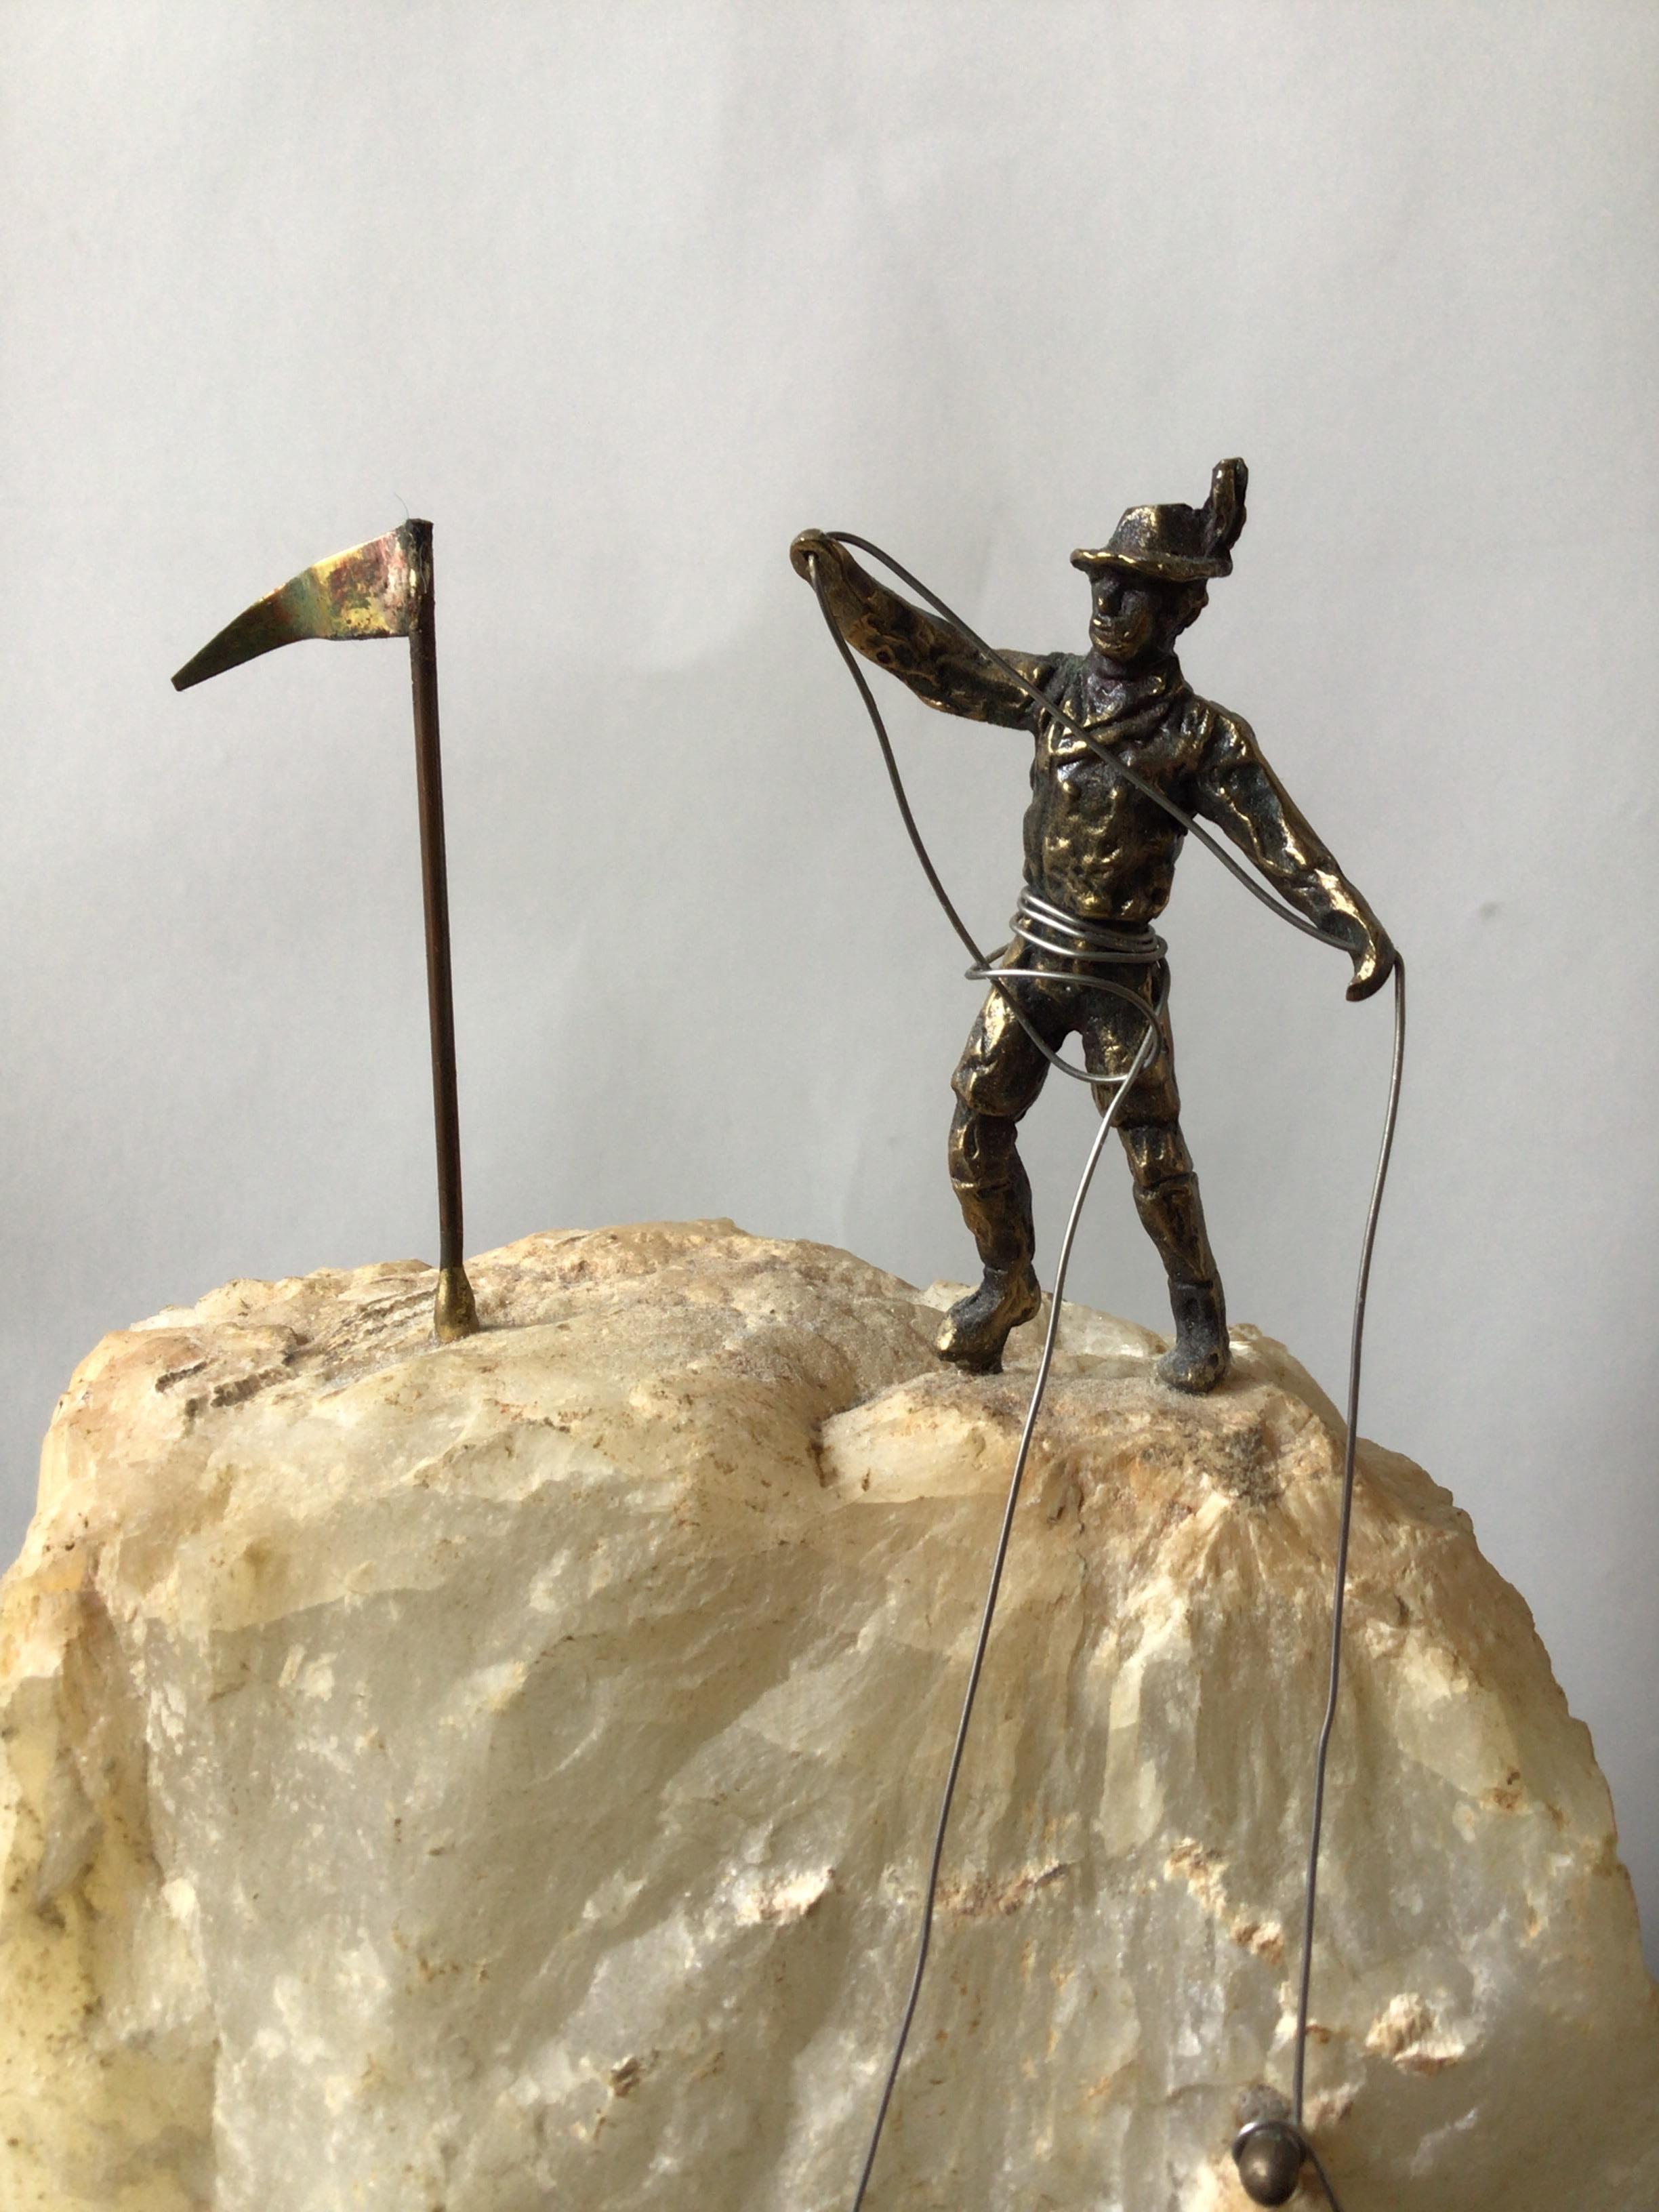 Mountain Climbers Sculpture by Jere 2